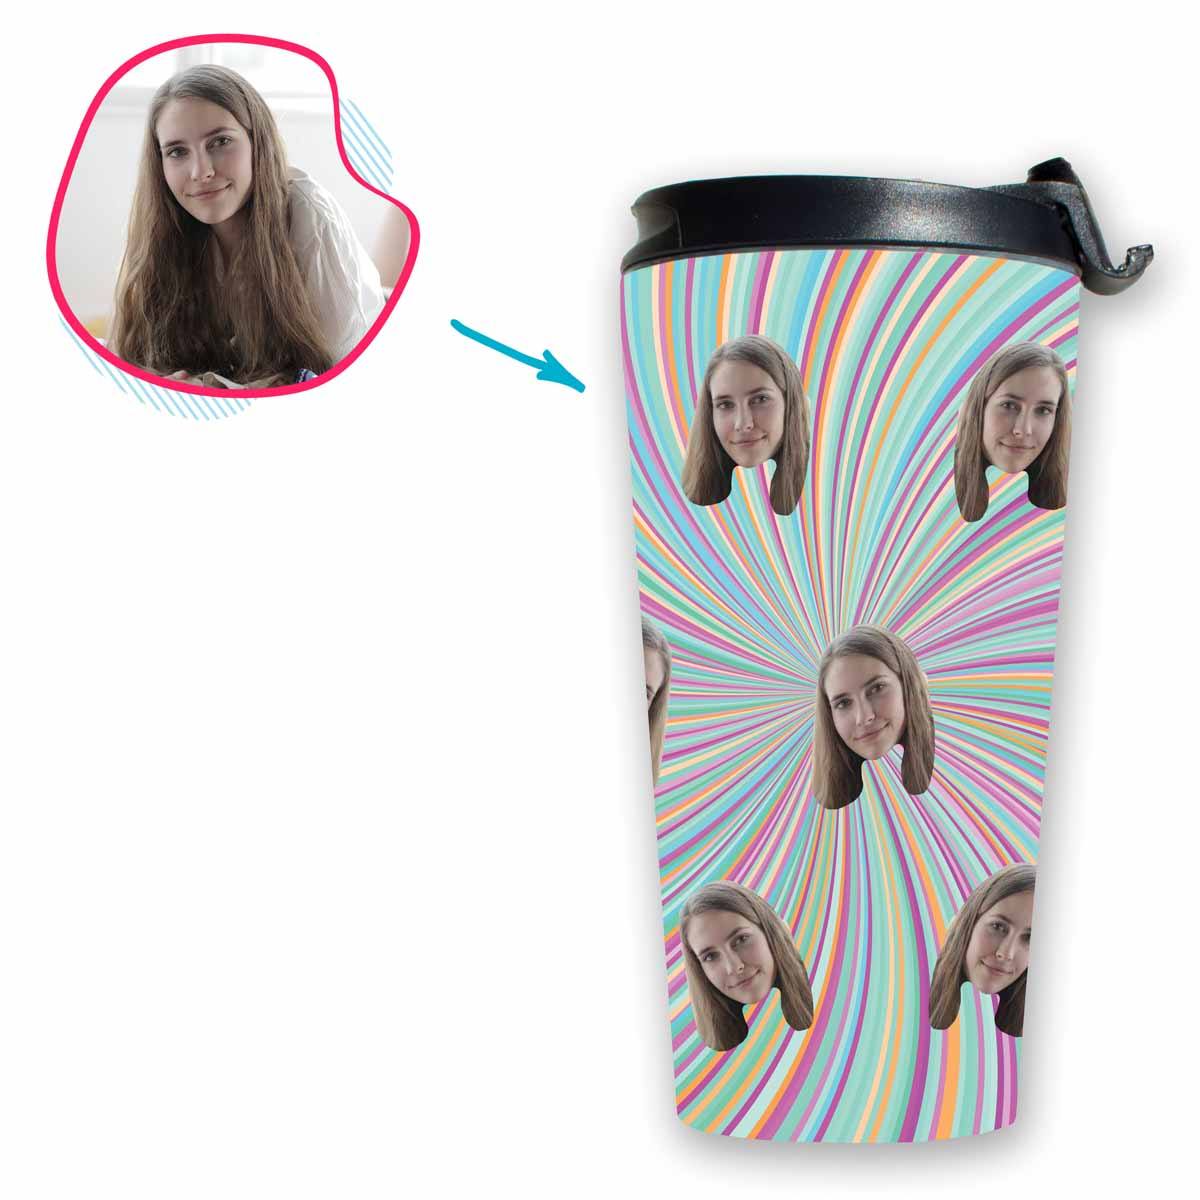 fantasy Fantasy travel mug personalized with photo of face printed on it